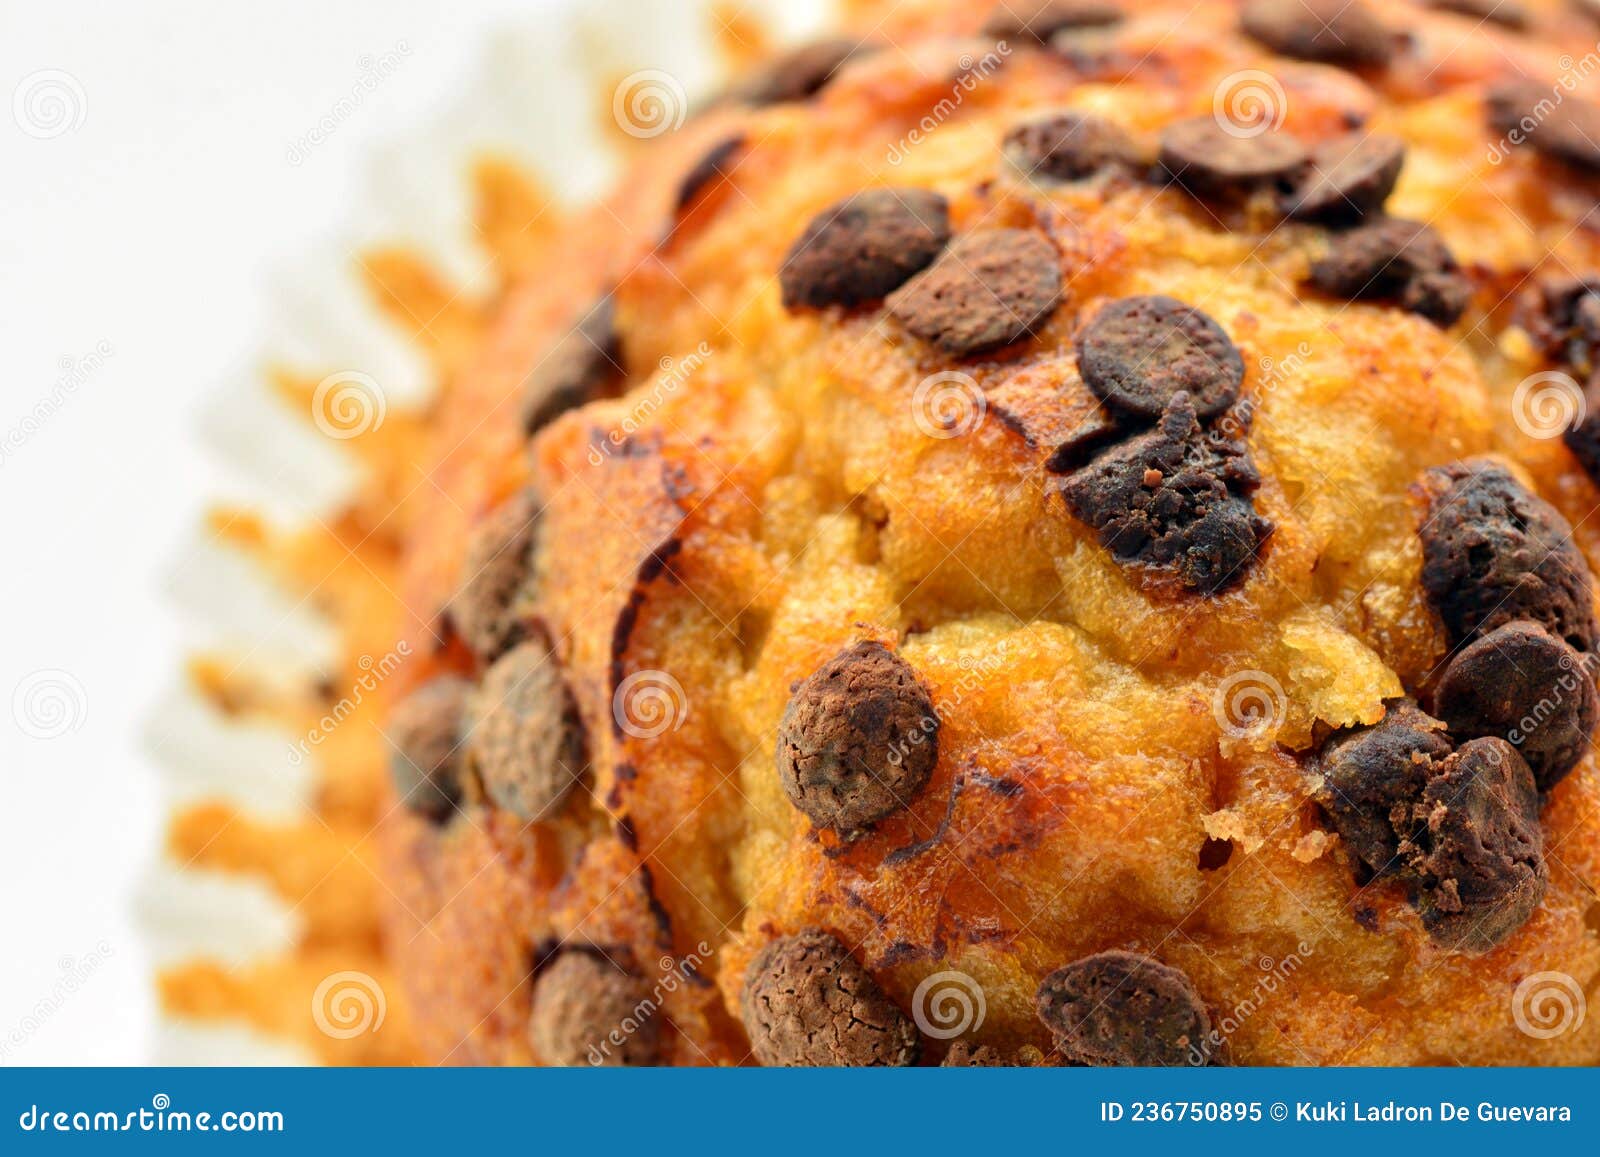 detail of fluffy chocolate chip muffins